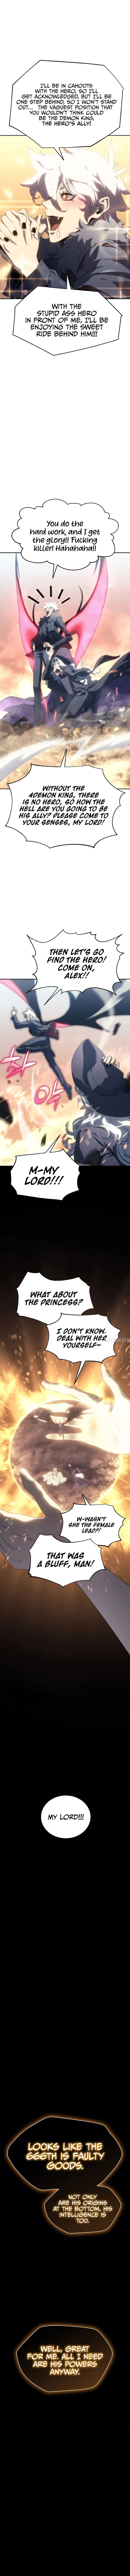 Why I Quit Being the Demon King - Chapter 2 Page 16